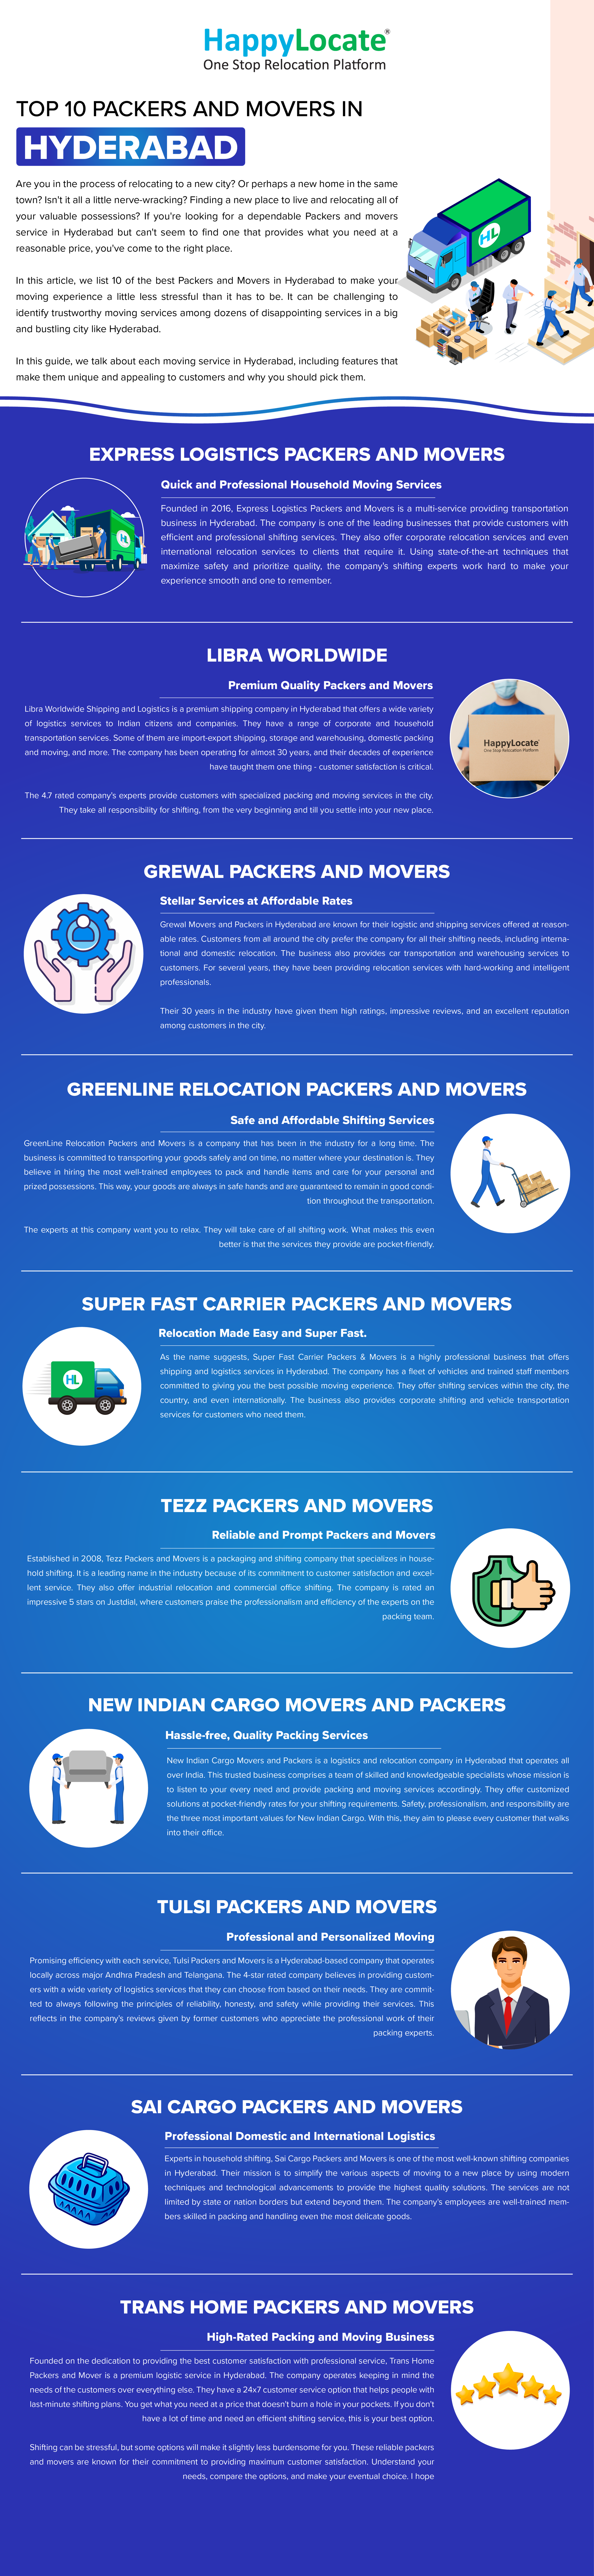 HappylLocate

One Stop Relocation Platform

TOP 10 PACKERS AND MOVERS IN

HYDERABAD

Are you in the process of relocating to a new city? Or perhaps a new home in the same
town? Isn't it all a little nerve-wracking? Finding a new place to live and relocating all of
your valuable possessions? If you're looking for a dependable Packers and movers
service in Hyderabad but can't seem to find one that provides what you need at a
reasonable price, you've come to the right place.

In this article, we list 10 of the best Packers and Movers in Hyderabad to make you
moving experience a little less stressful than it has to be. It can be challenging to
identify trustworthy moving services among dozens of disappointing services in a big
and bustling city like Hyderabad.

In this guide, we talk about each moving service in Hyderabad, including features that
make them unique and appealing to customers and why you should pick them.

 

EXPRESS LOGISTICS PACKERS AND MOVERS

Quick and Professional Household Moving Services

Founded in 2016, Express Logistics Packers and Movers is a multi-service providing transportation
business in Hyderabad. The company is one of the leading businesses that provide customers with
efficient and professional shifting services. They also offer corporate relocation services and even
international relocation services to clients that require it. Using state-of-the-art techniques that

 

maximize safety and prioritize quality, the company's shifting experts work hard to make your
experience smooth and one to remember.

LIBRA WORLDWIDE

Premium Quality Packers and Movers

 

Libra Worldwide Shipping and Logistics is a premium shipping company in Hyderabad that offers a wide variety
of logistics services to Indian citizens and companies. They have a range of corporate and household

transportation services. Some of them are import-export shipping, storage and warehousing, domestic packing

HappylLocate
and moving, and more. The company has been operating for almost 30 years, and their decades of experience One Stop Re

have taught them one thing - customer satisfaction is critical.

 

The 4.7 rated company's experts provide customers with specialized packing and moving services in the city.

They take all responsibility for shifting, from the very beginning and till you settle into your new place.

GREWAL PACKERS AND MOVERS

Stellar Services at Affordable Rates

 

Grewal Movers and Packers in Hyderabad are known for their logistic and shipping services offered at reason-
able rates. Customers from all around the city prefer the company for all their shifting needs, including interna-
tional and domestic relocation. The business also provides car transportation and warehousing services to
customers. For several years, they have been providing relocation services with hard-working and intelligent

professionals.

 

Their 30 years in the industry have given them high ratings, impressive reviews, and an excellent reputation

among customers in the city.

GREENLINE RELOCATION PACKERS AND MOVERS

Safe and Affordable Shifting Services

 

Greenline Relocation Packers and Movers is a company that has been in the industry for a long time. The
business is committed to transporting your goods safely and on time, no matter where your destination is. They
believe in hiring the most well-trained employees to pack and handle items and care for your personal and
prized possessions. This way, your goods are always in safe hands and are guaranteed to remain in good condi-

tion throughout the transportation.

 

The experts at this company want you to relax. They will take care of all shifting work. What makes this even

better is that the services they provide are pocket-friendly.

SUPER FAST CARRIER PACKERS AND MOVERS

Relocation Made Easy and Super Fast.

 

As the name suggests, Super Fast Carrier Packers & Movers is a highly professional business that offers
shipping and logistics services in Hyderabad. The company has a fleet of vehicles and trained staff members
committed to giving you the best possible moving experience. They offer shifting services within the city, the
country, and even internationally. The business also provides corporate shifting and vehicle transportation

services for customers who need them.

 

TEZZ PACKERS AND MOVERS

Reliable and Prompt Packers and Movers

 

Established in 2008, Tezz Packers and Movers is a packaging and shifting company that specializes in house-
hold shifting. It is a leading name in the industry because of its commitment to customer satisfaction and excel-
lent service. They also offer industrial relocation and commercial office shifting. The company is rated an
impressive 5 stars on Justdial, where customers praise the professionalism and efficiency of the experts on the

packing team.

 

NEW INDIAN CARGO MOVERS AND PACKERS

Hassle-free, Quality Packing Services

 

New Indian Cargo Movers and Packers is a logistics and relocation company in Hyderabad that operates all
over India. This trusted business comprises a team of skilled and knowledgeable specialists whose mission is
to listen to your every need and provide packing and moving services accordingly. They offer customized
solutions at pocket-friendly rates for your shifting requirements. Safety, professionalism, and responsibility are
the three most important values for New Indian Cargo. With this, they aim to please every customer that walks

into their office.

 

TULSI PACKERS AND MOVERS

Professional and Personalized Moving

 

Promising efficiency with each service, Tulsi Packers and Movers is a Hyderabad-based company that operates
locally across major Andhra Pradesh and Telangana. The 4-star rated company believes in providing custom-
ers with a wide variety of logistics services that they can choose from based on their needs. They are commit-

ted to always following the principles of reliability, honesty, and safety while providing their services. This

"
L

reflects in the company's reviews given by former customers who appreciate the professional work of their

   

packing experts.

SAI CARGO PACKERS AND MOVERS

Professional Domestic and International Logistics

 

Experts in household shifting, Sai Cargo Packers and Movers is one of the most well-known shifting companies
in Hyderabad. Their mission is to simplify the various aspects of moving to a new place by using modern
techniques and technological advancements to provide the highest quality solutions. The services are not
limited by state or nation borders but extend beyond them. The company's employees are well-trained mem-

bers skilled in packing and handling even the most delicate goods.

 

TRANS HOME PACKERS AND MOVERS

High-Rated Packing and Moving Business

Founded on the dedication to providing the best customer satisfaction with professional service, Trans Home
Packers and Mover is a premium logistic service in Hyderabad. The company operates keeping in mind the
needs of the customers over everything else. They have a 24x7 customer service option that helps people with
last-minute shifting plans. You get what you need at a price that doesn't burn a hole in your pockets. If you don't

have a lot of time and need an efficient shifting service, this is your best option.

 

Shifting can be stressful, but some options will make it slightly less burdensome for you. These reliable packers
and movers are known for their commitment to providing maximum customer satisfaction. Understand your

needs, compare the options, and make your eventual choice. | hope